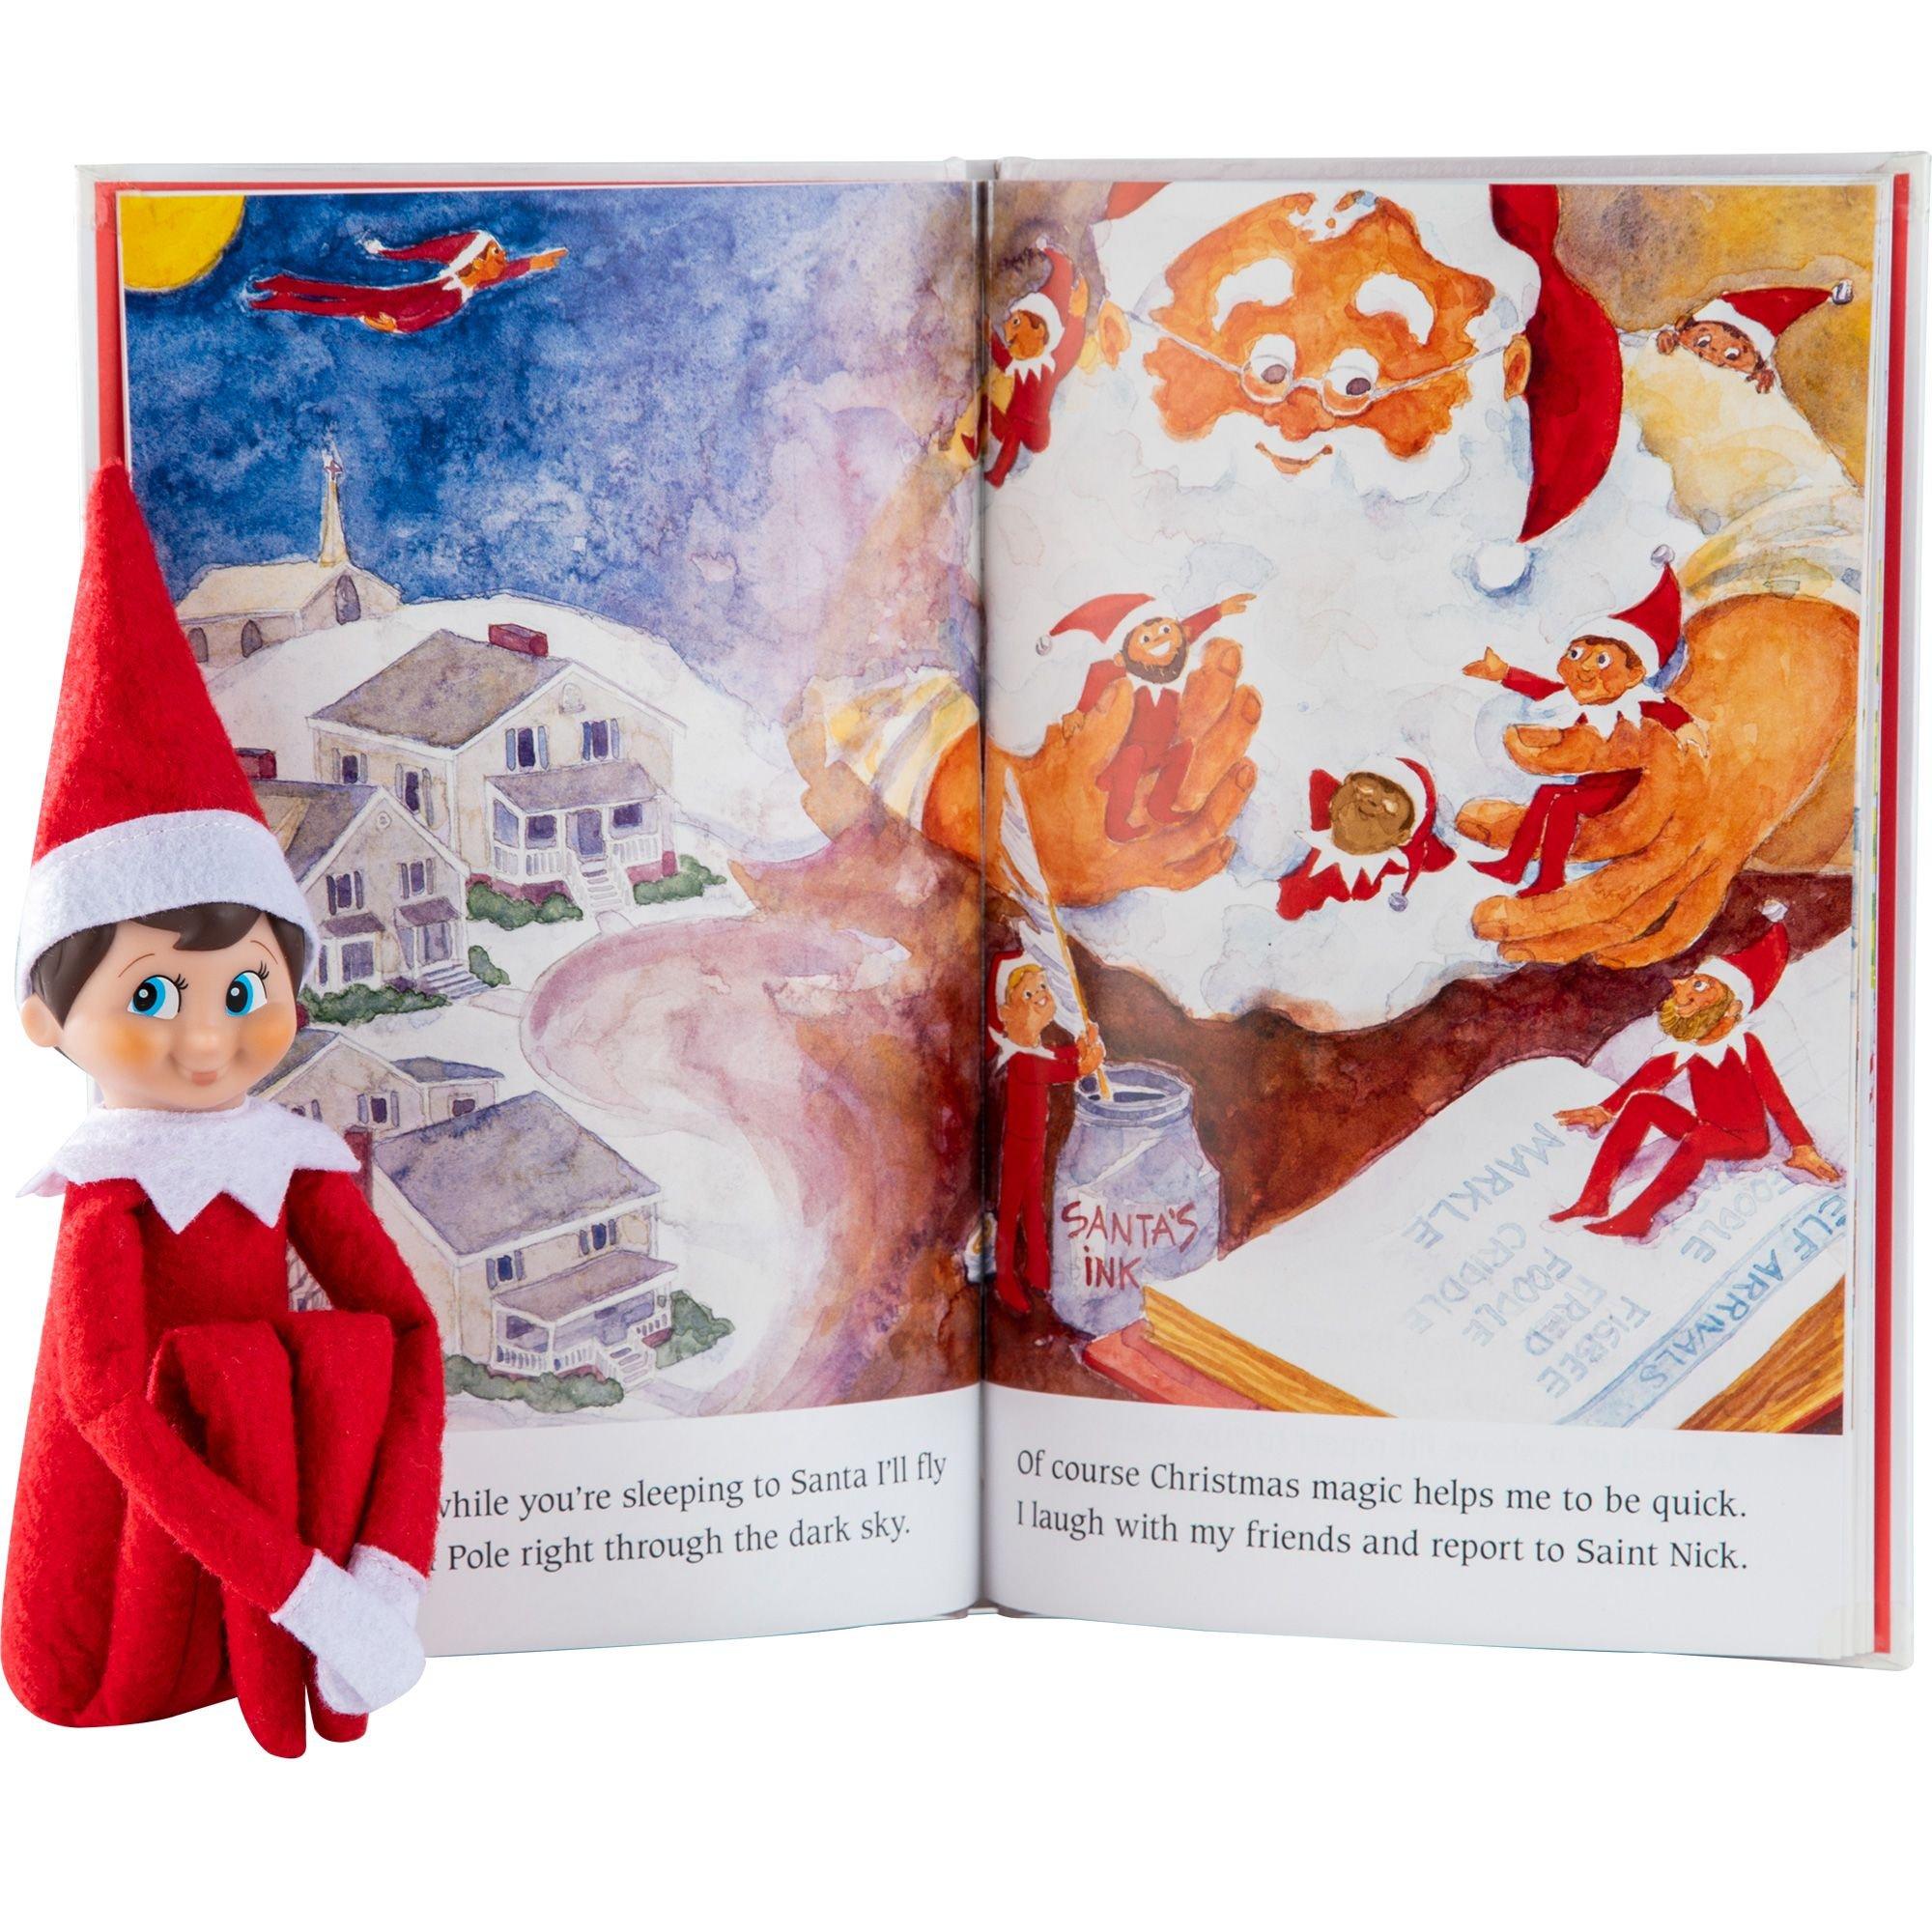 The Elf on the Shelf®: A Christmas Tradition with Blue-Eyed Boy Scout Elf